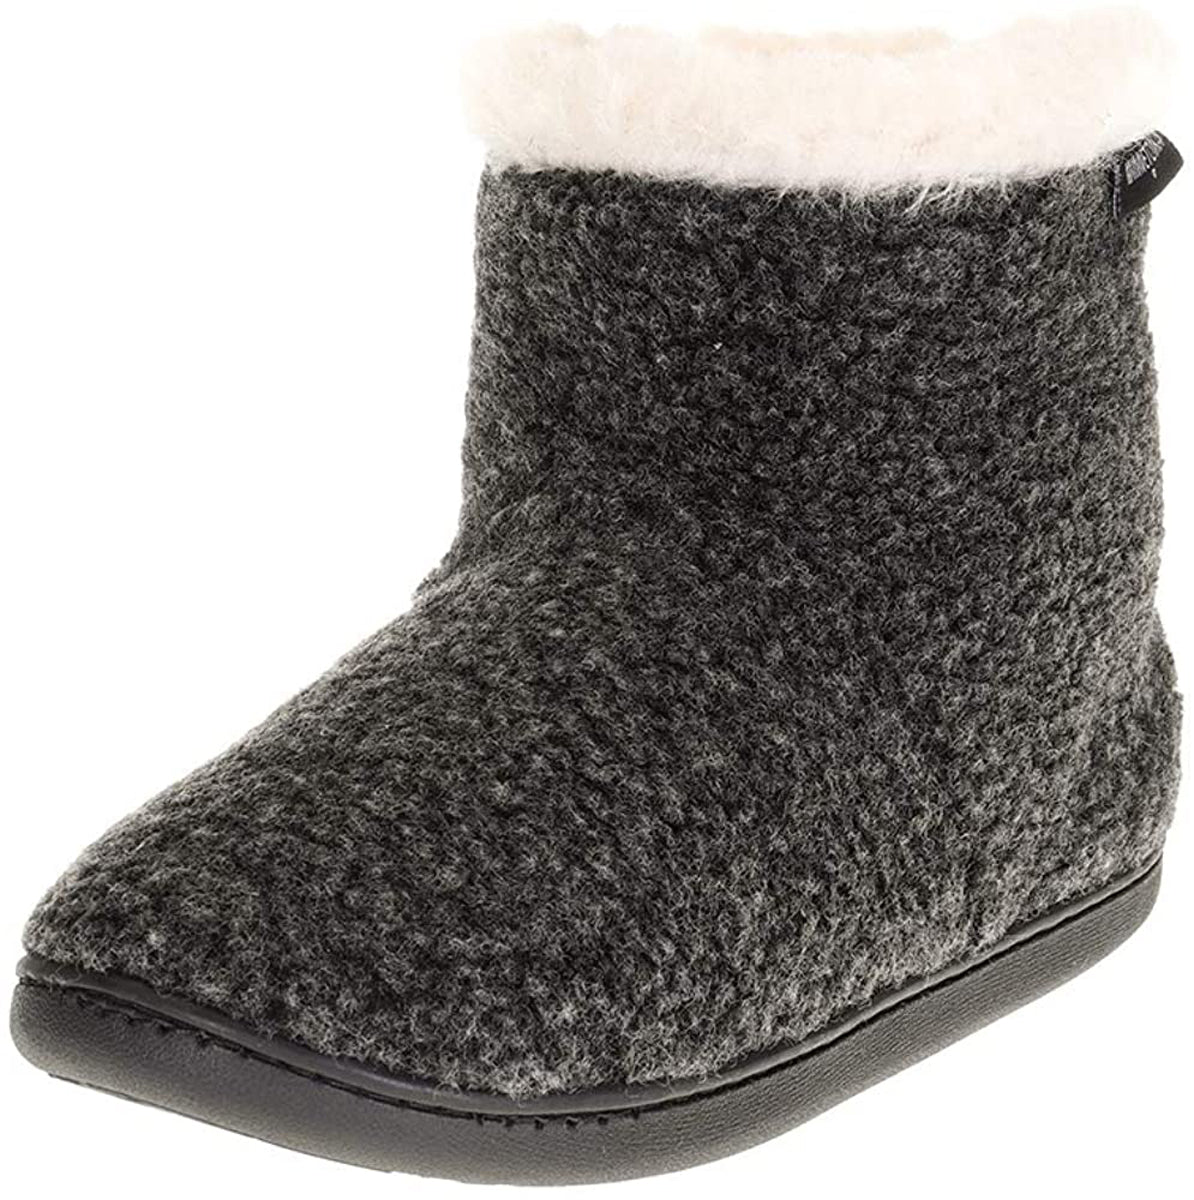 Women's Minnetonka Betty Bootie Slipper in Charcoal from the front view